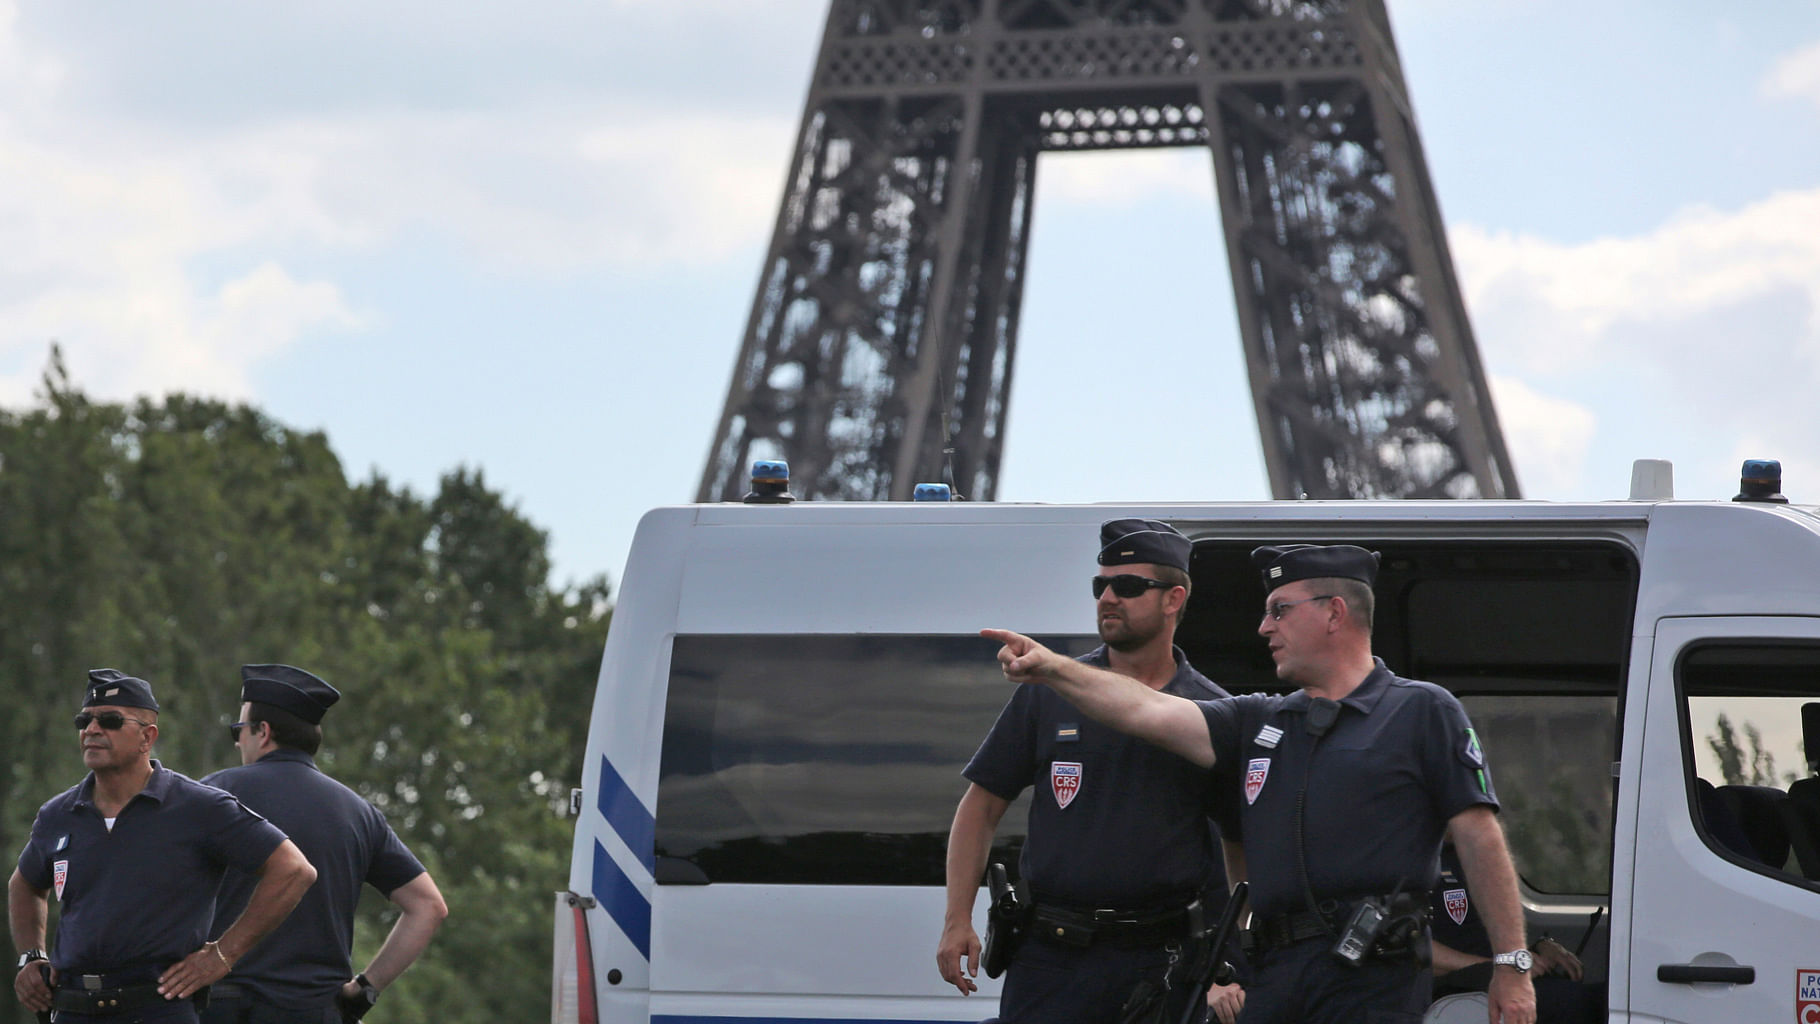 Witnesses claim of strong police and military presence at the Eiffel tower. Image used for representational purposes. (Photo: AP)